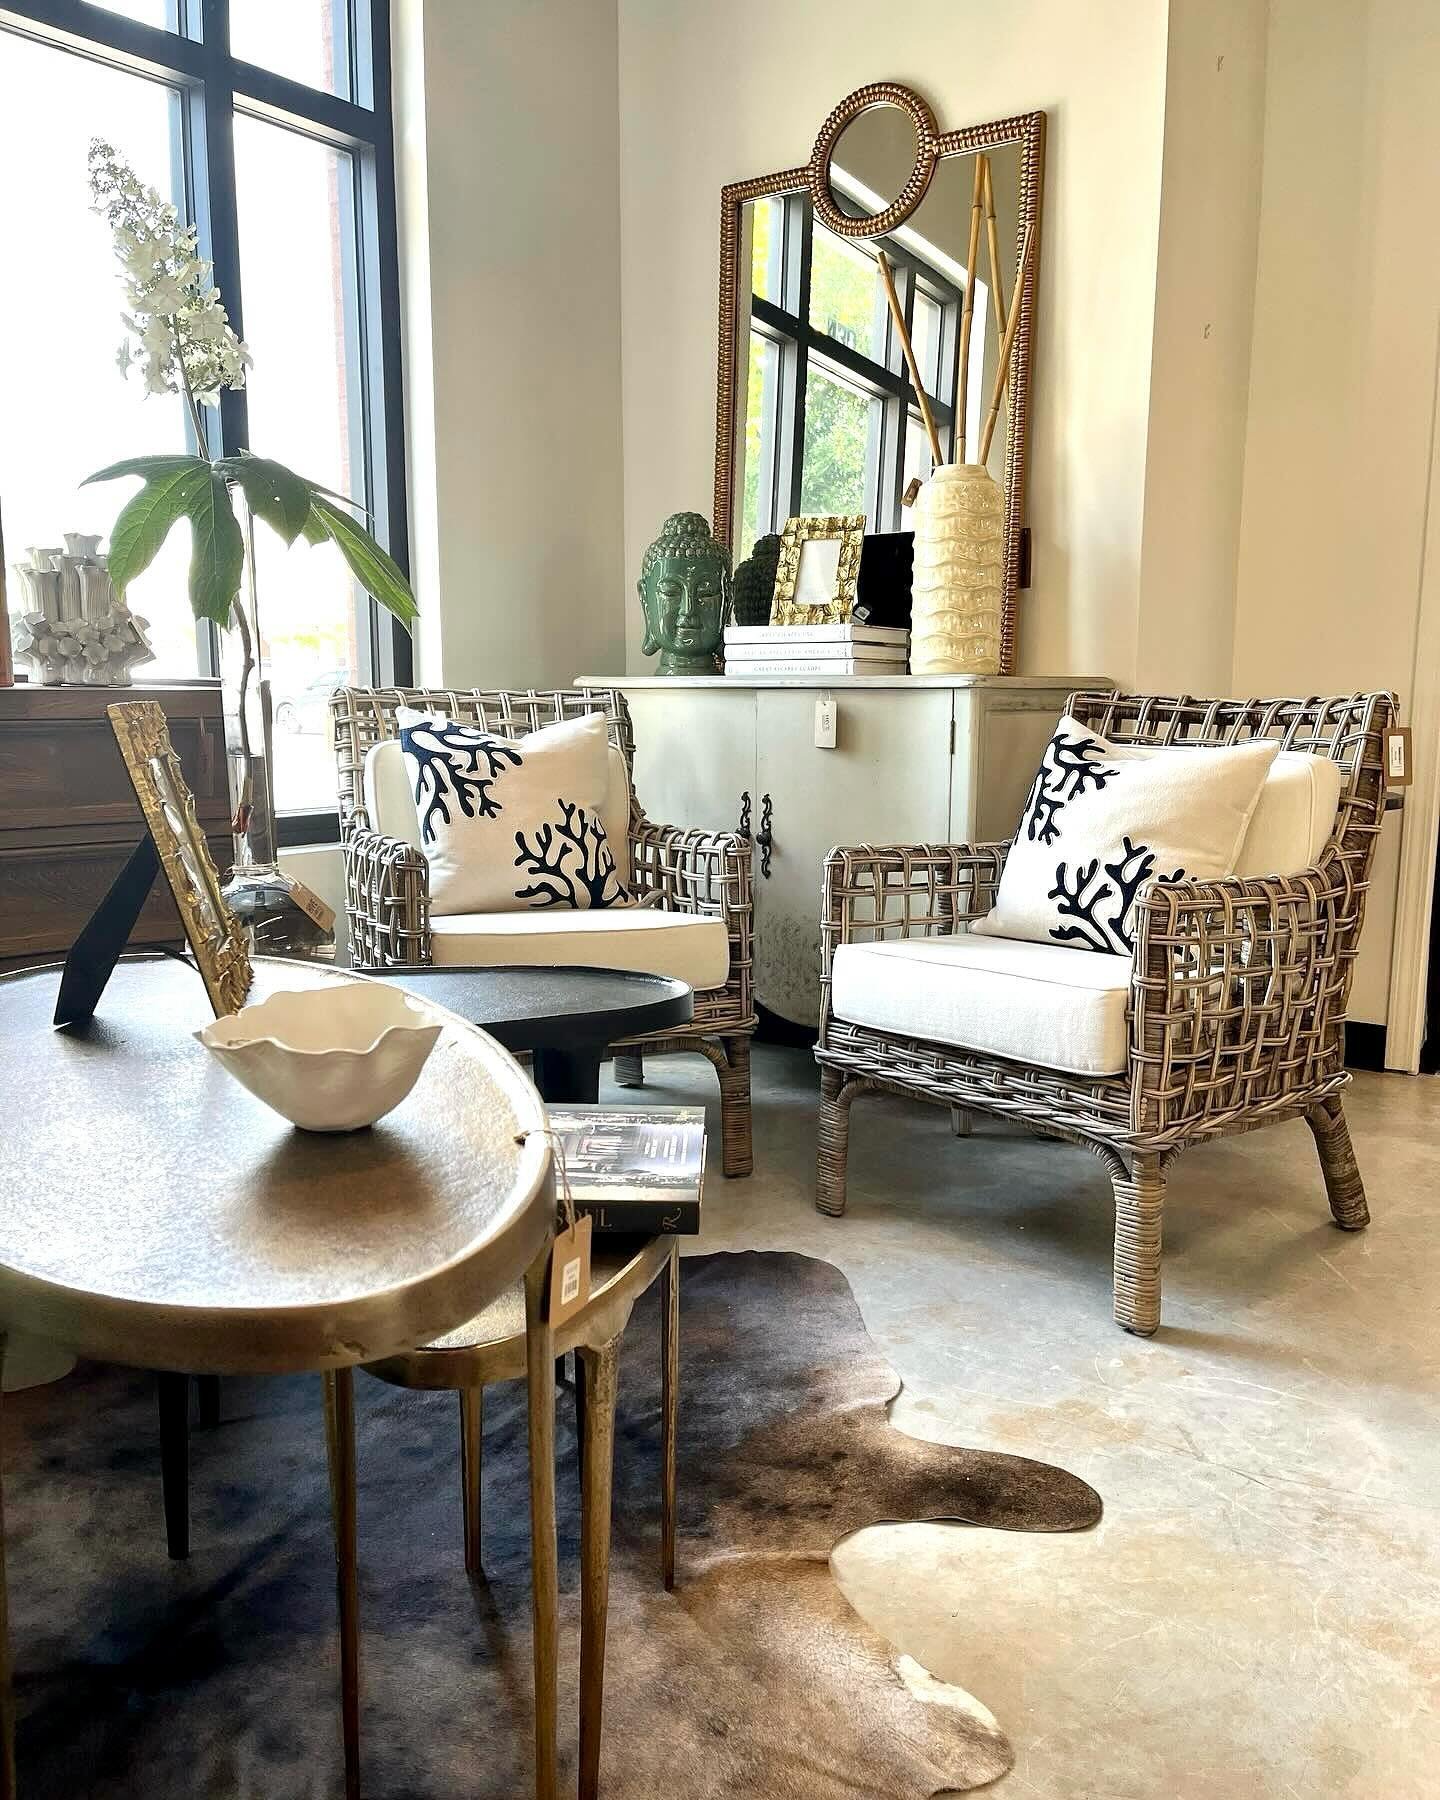 New Home Store Obsession Alert! The Access team is absolutely obsessed with Fairhope&rsquo;s latest shop, Hive Modern Home. Be sure to stop by and meet local owners Phillip and Chris and check out the chic and well curated coastal and modern furnishi